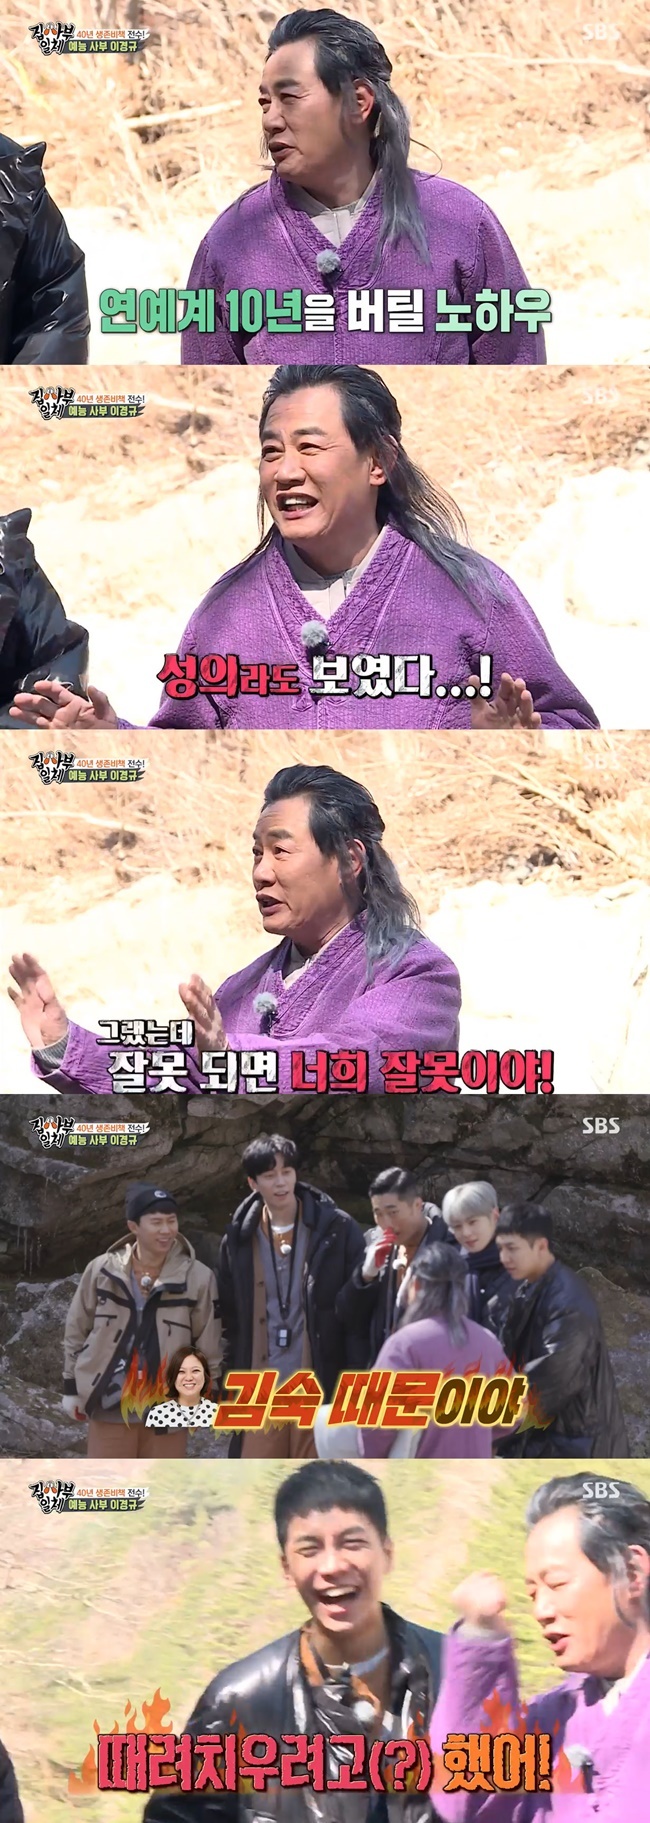 Lee Kyung-kyu reveals Weaning leaving a worldly worldOn March 28, SBS All The Butlers appeared as a master of the broadcasting godfather Lee Kyung-kyu who left the world world with Gangwon Province and South Korea Inje.Lee Kyung-kyu said, It is not different, but I invited you to this deep mountain to pass on the know-how that you will endure 10 years of entertainment life in the future. If you know this, you can eat it for 10 years.When the members asked about Weaning, who had been back to a worldly world in Gangwon Province and South Korea, Lee Kyung-kyu said, If the contents are not funny, you should show your sincerity. If you do not have fun,I do not care if you are insulted. I can do everything I can. 